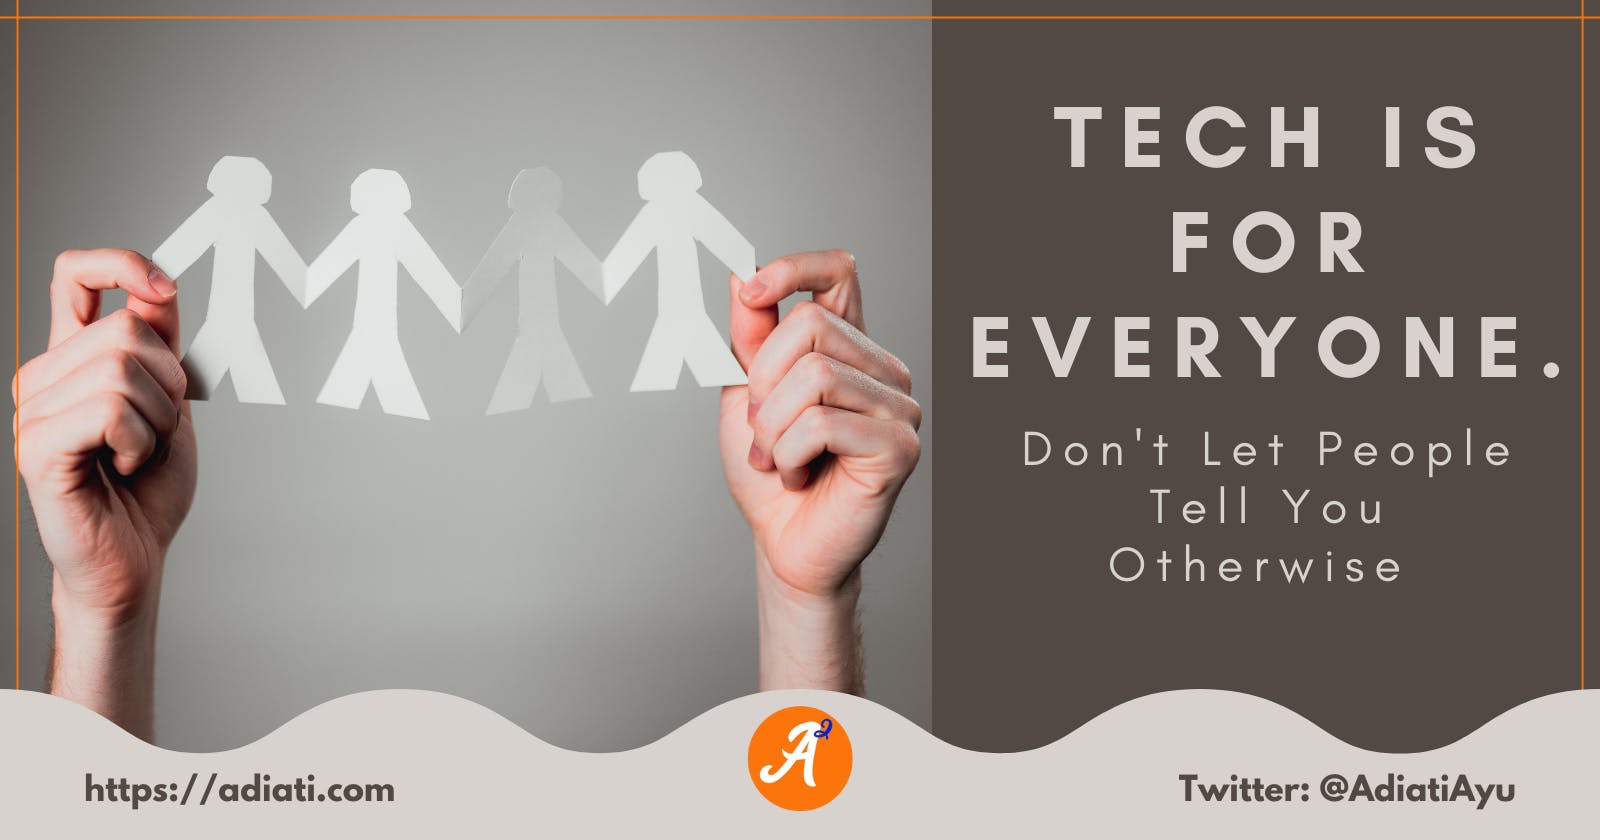 Tech Is For Everyone. Don't Let People Tell You Otherwise